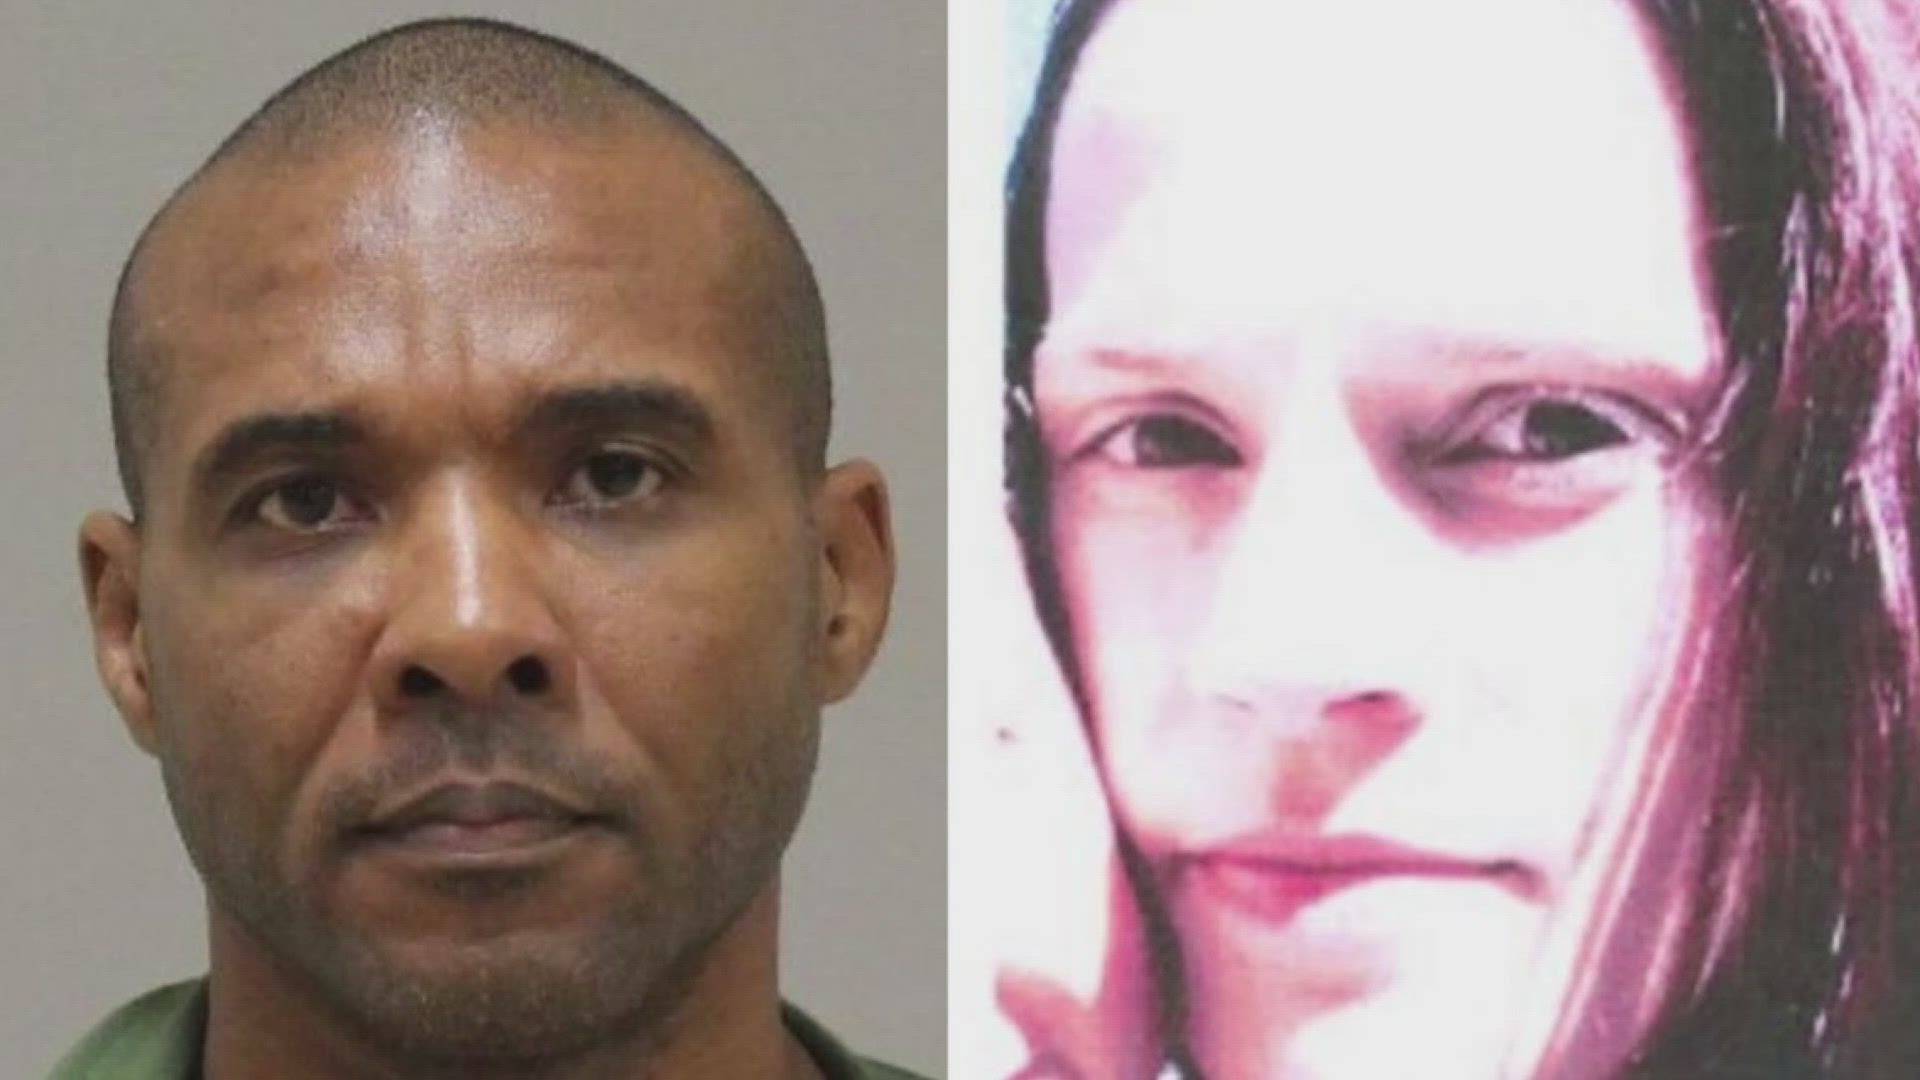 Marks is now facing a second-degree murder charge for the disappearance of his ex-girlfriend.